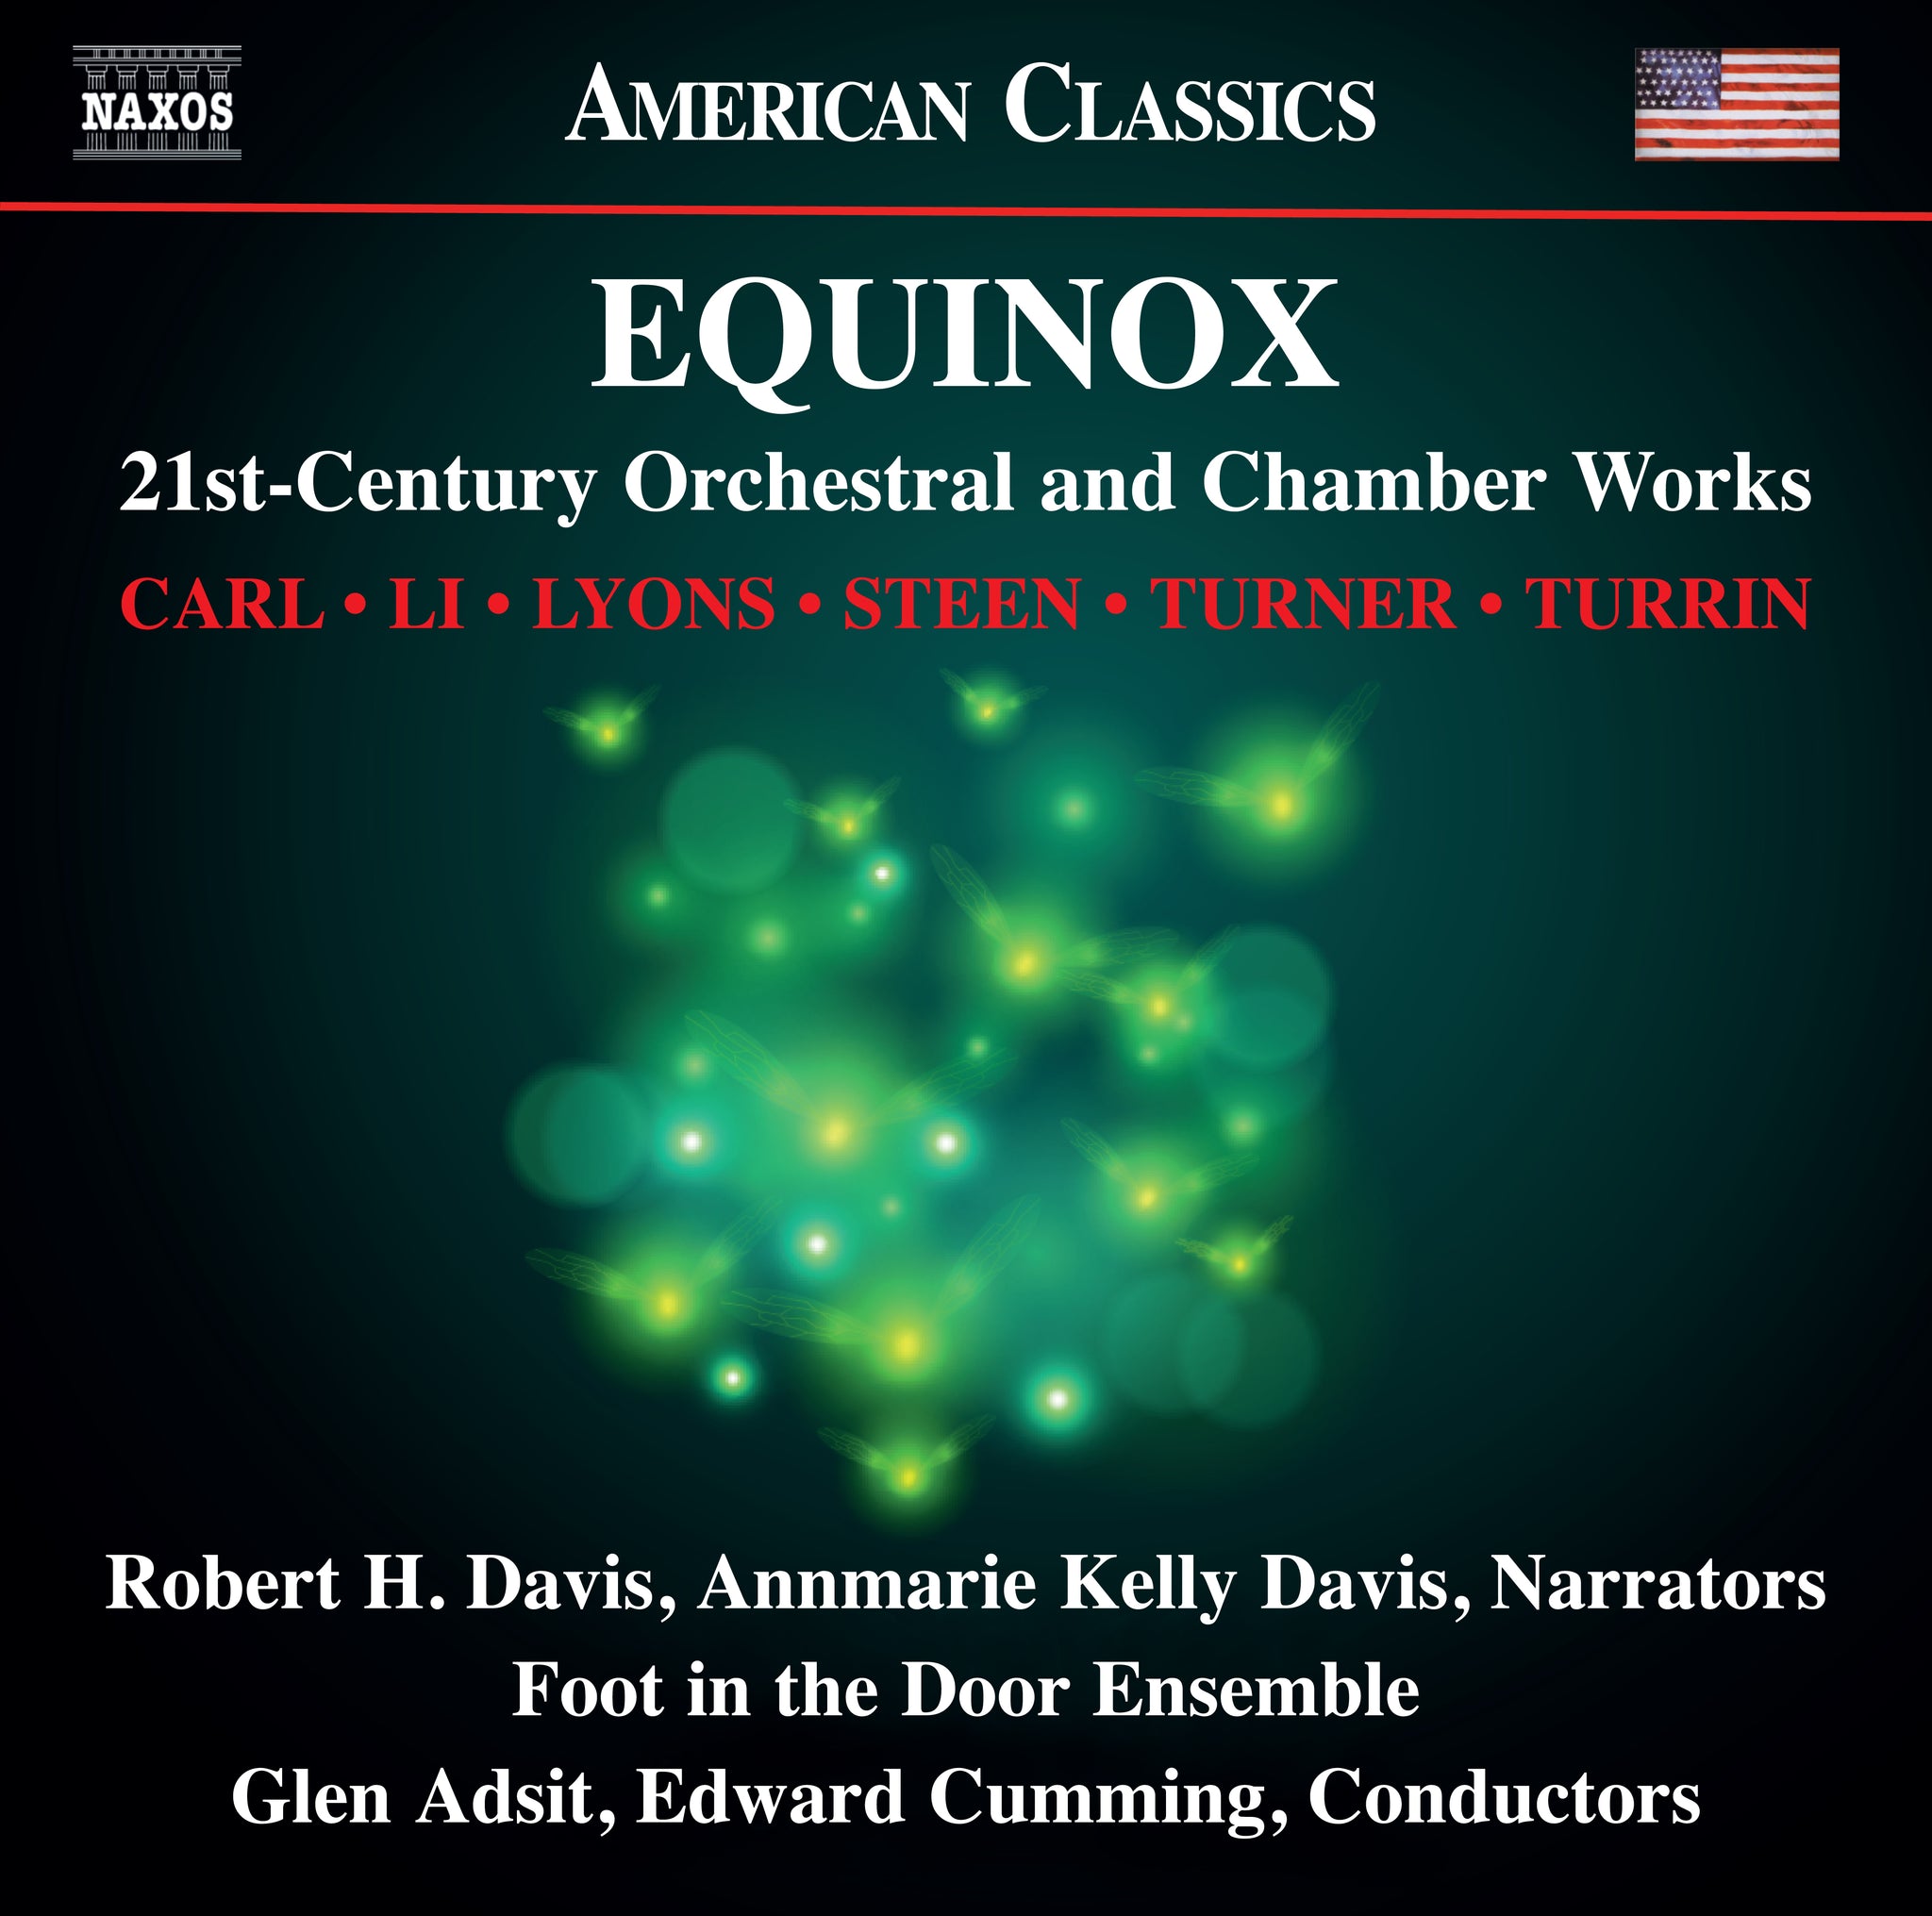 Equinox - New Orchestral & Chamber Works from the Hartt School / Foot in the Door